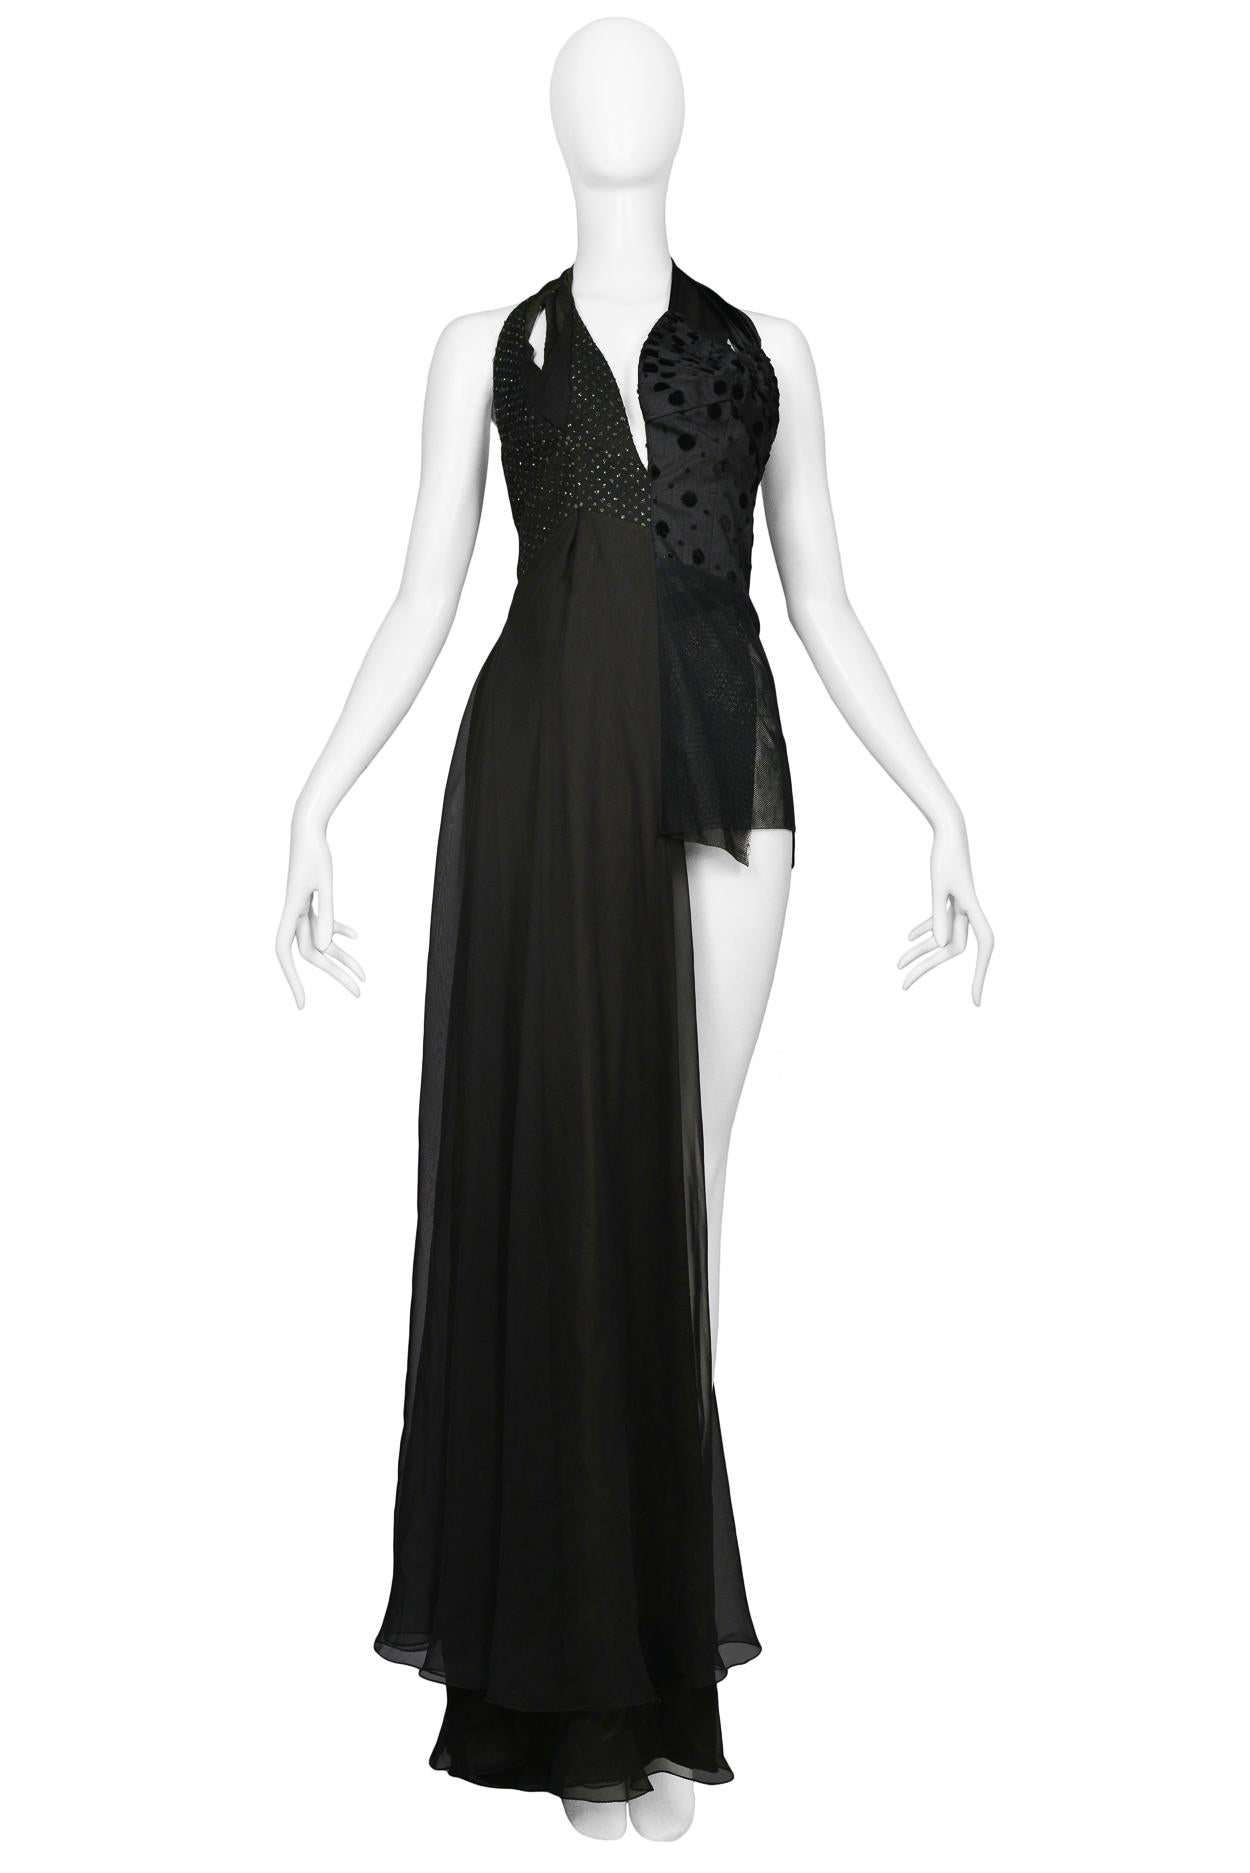 Resurrection Vintage is excited to offer a vintage Maison Martin Margiela black asymmetrical evening gown featuring one covered leg, one short leg, a halter bodice, and contrasting fabrics. 

Maison Martin Margiela
Size: Small
Measurements: Bust 30